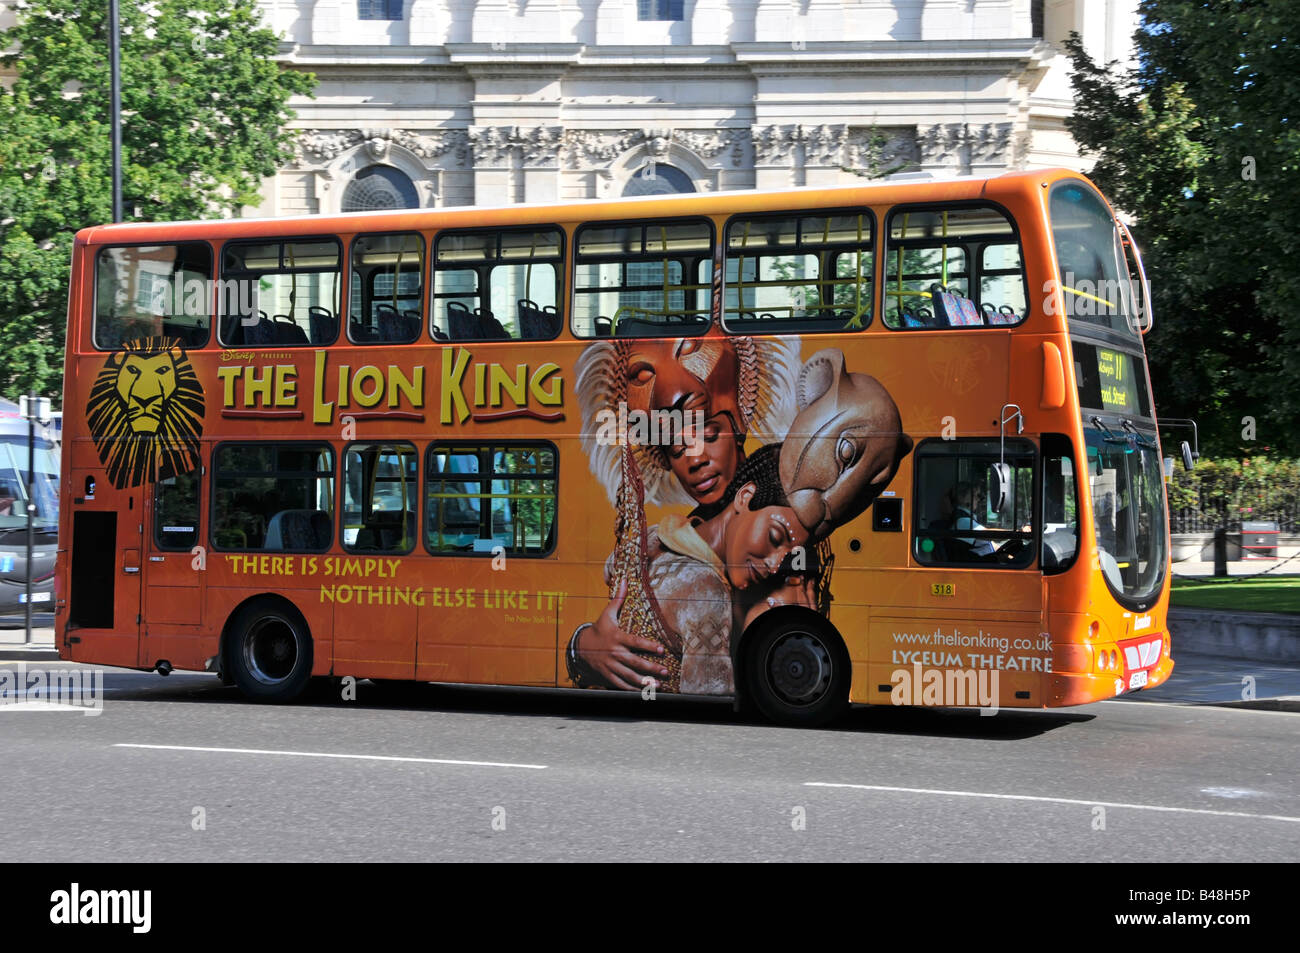 London double decker bus one side covered with colourful advertising graphics for the Lion King musical stage show at the Lyceum Theatre England UK Stock Photo